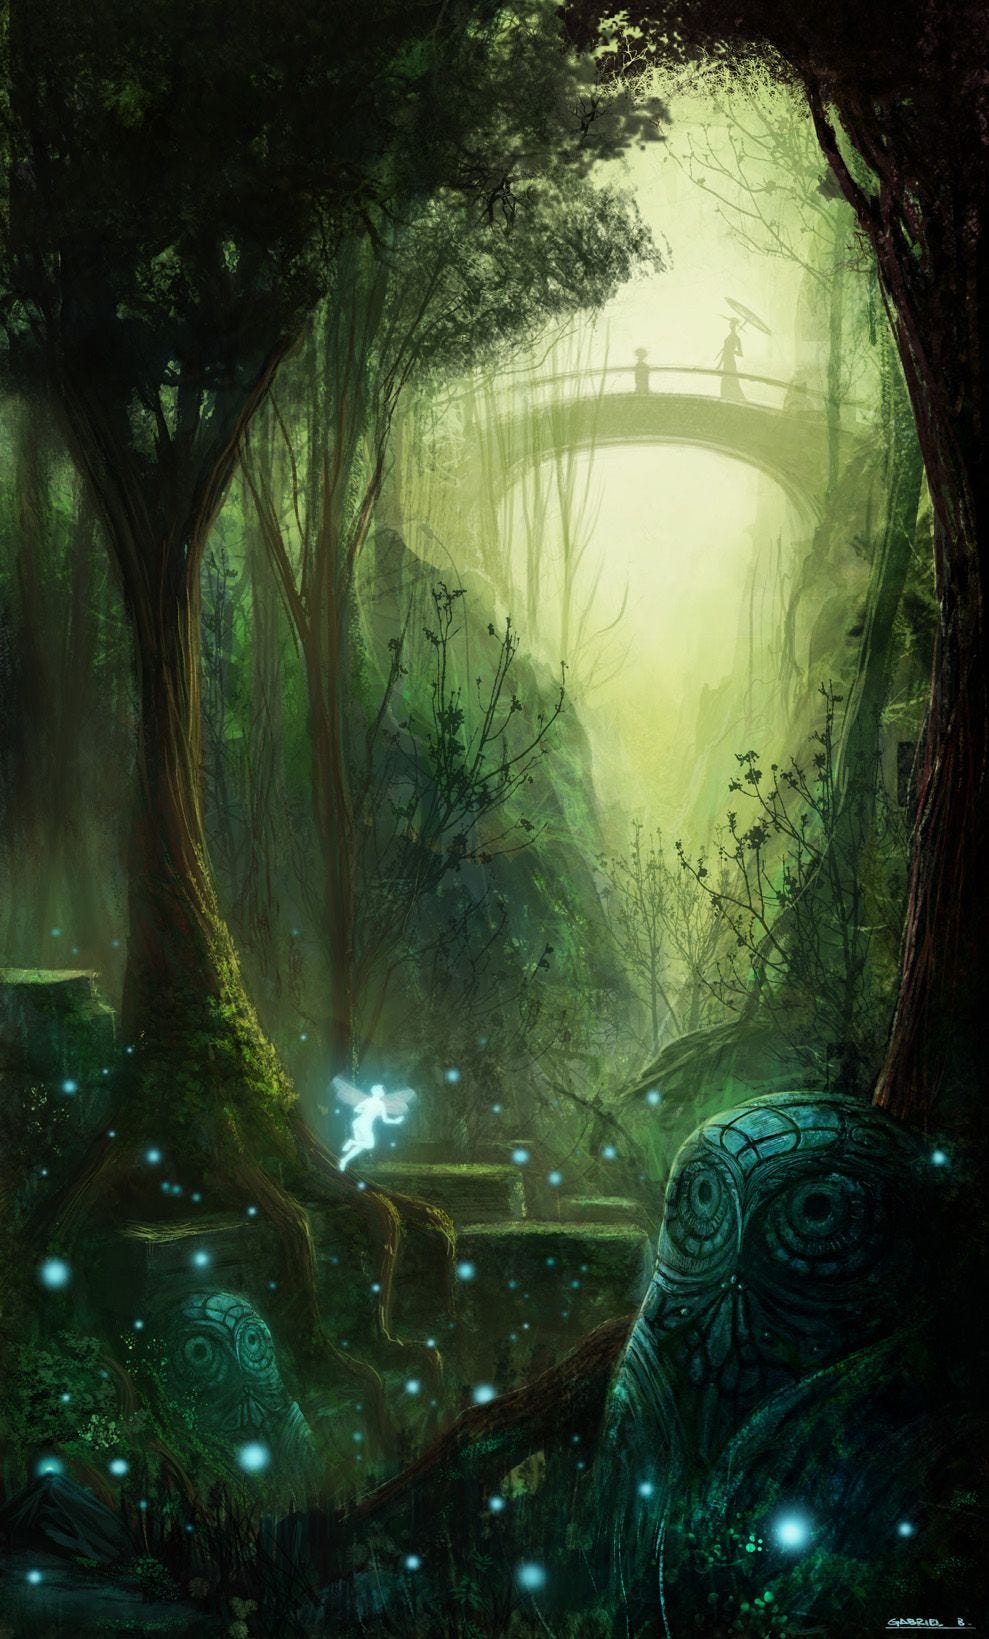 ≍ Nature's Fairy Nymphs ≍ magical elves, sprites, pixies and winged woodland faeries - Forgotten ...